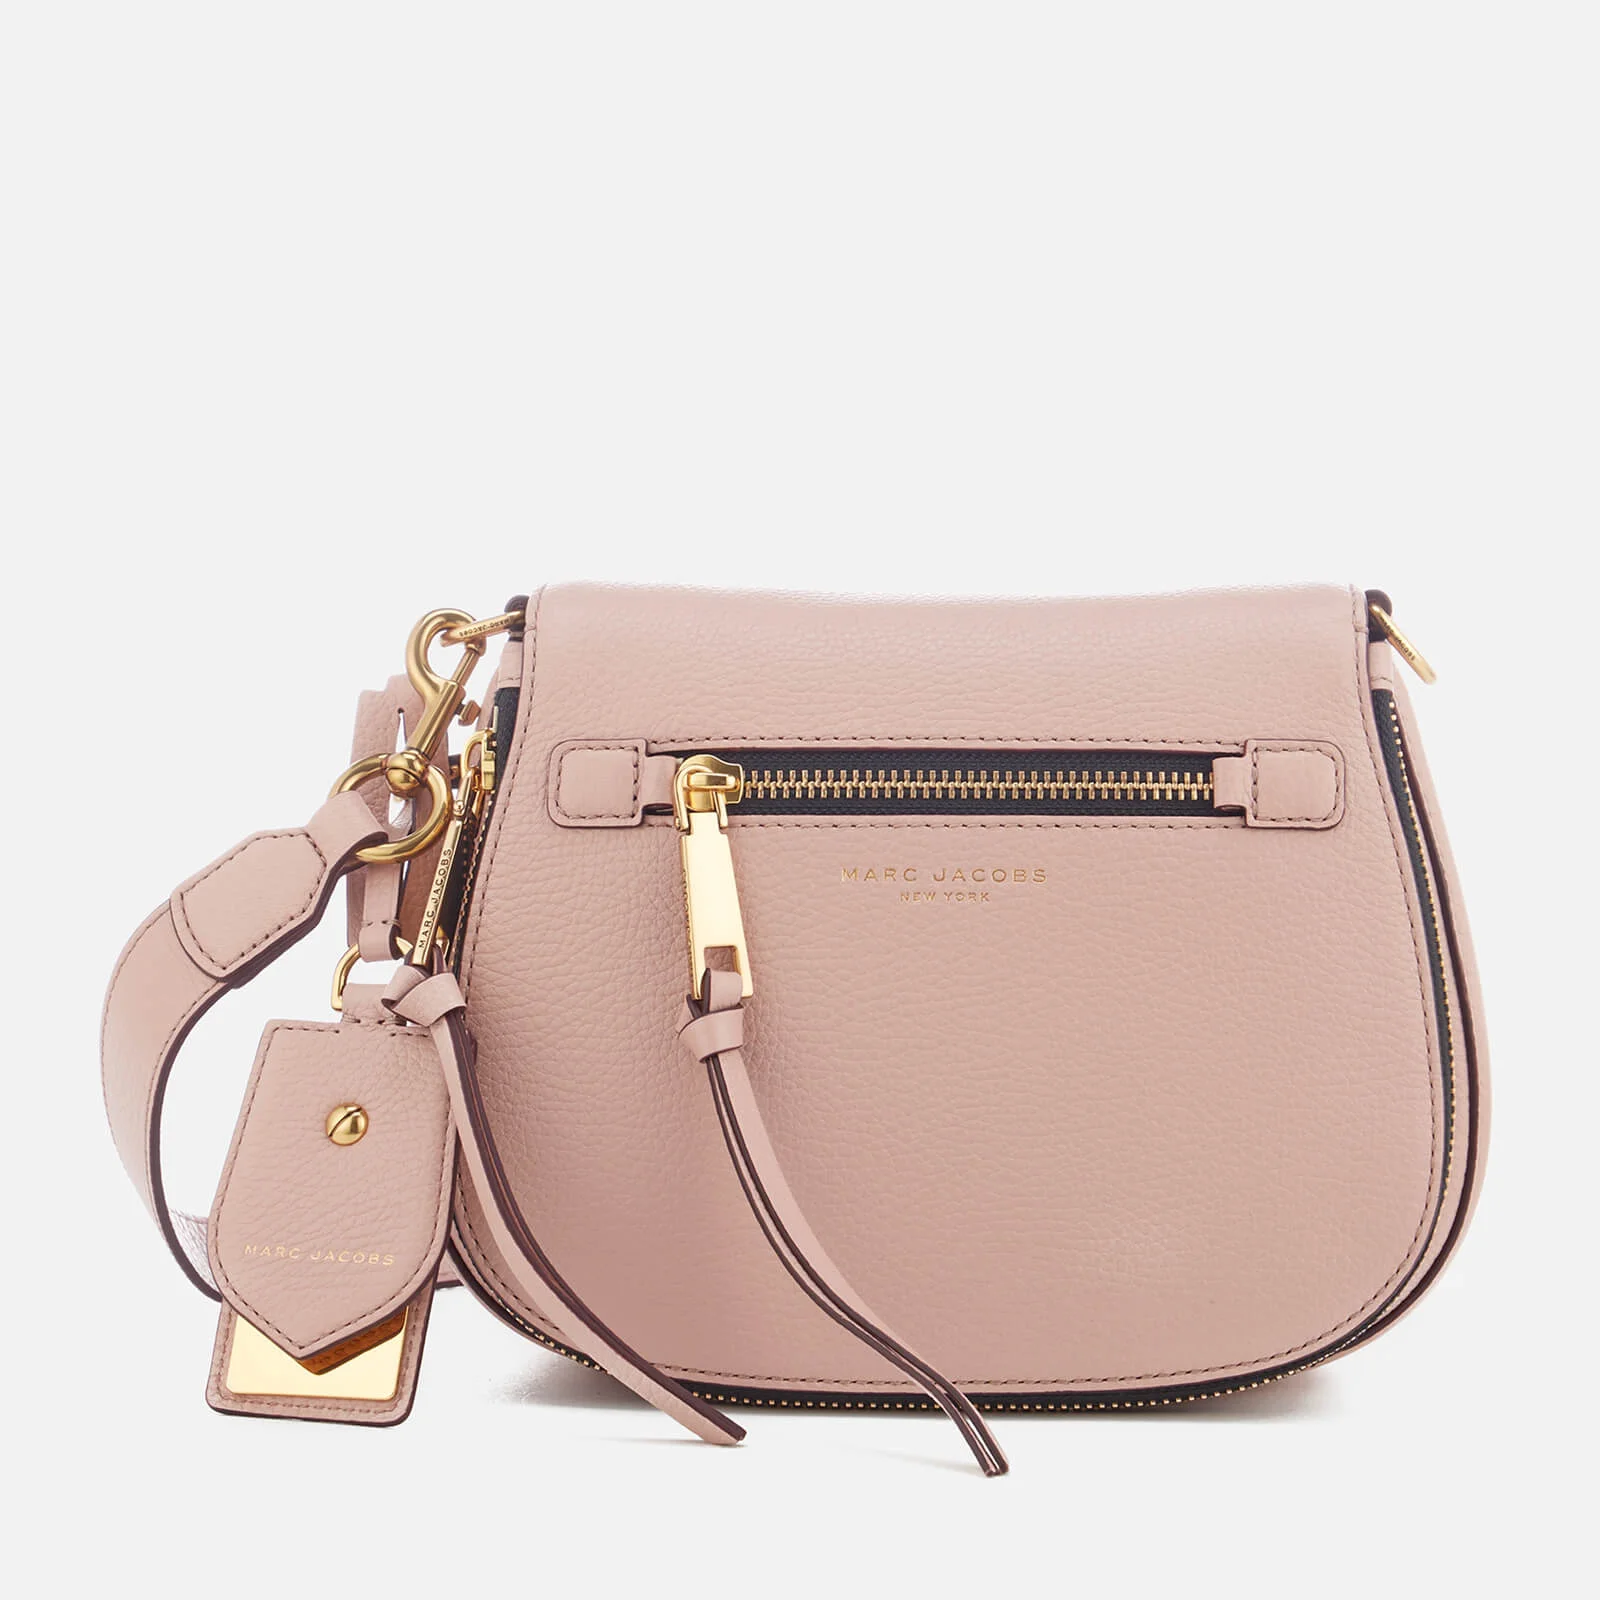 Marc Jacobs Women's Small Nomad Cross Body Bag - Rose Image 1